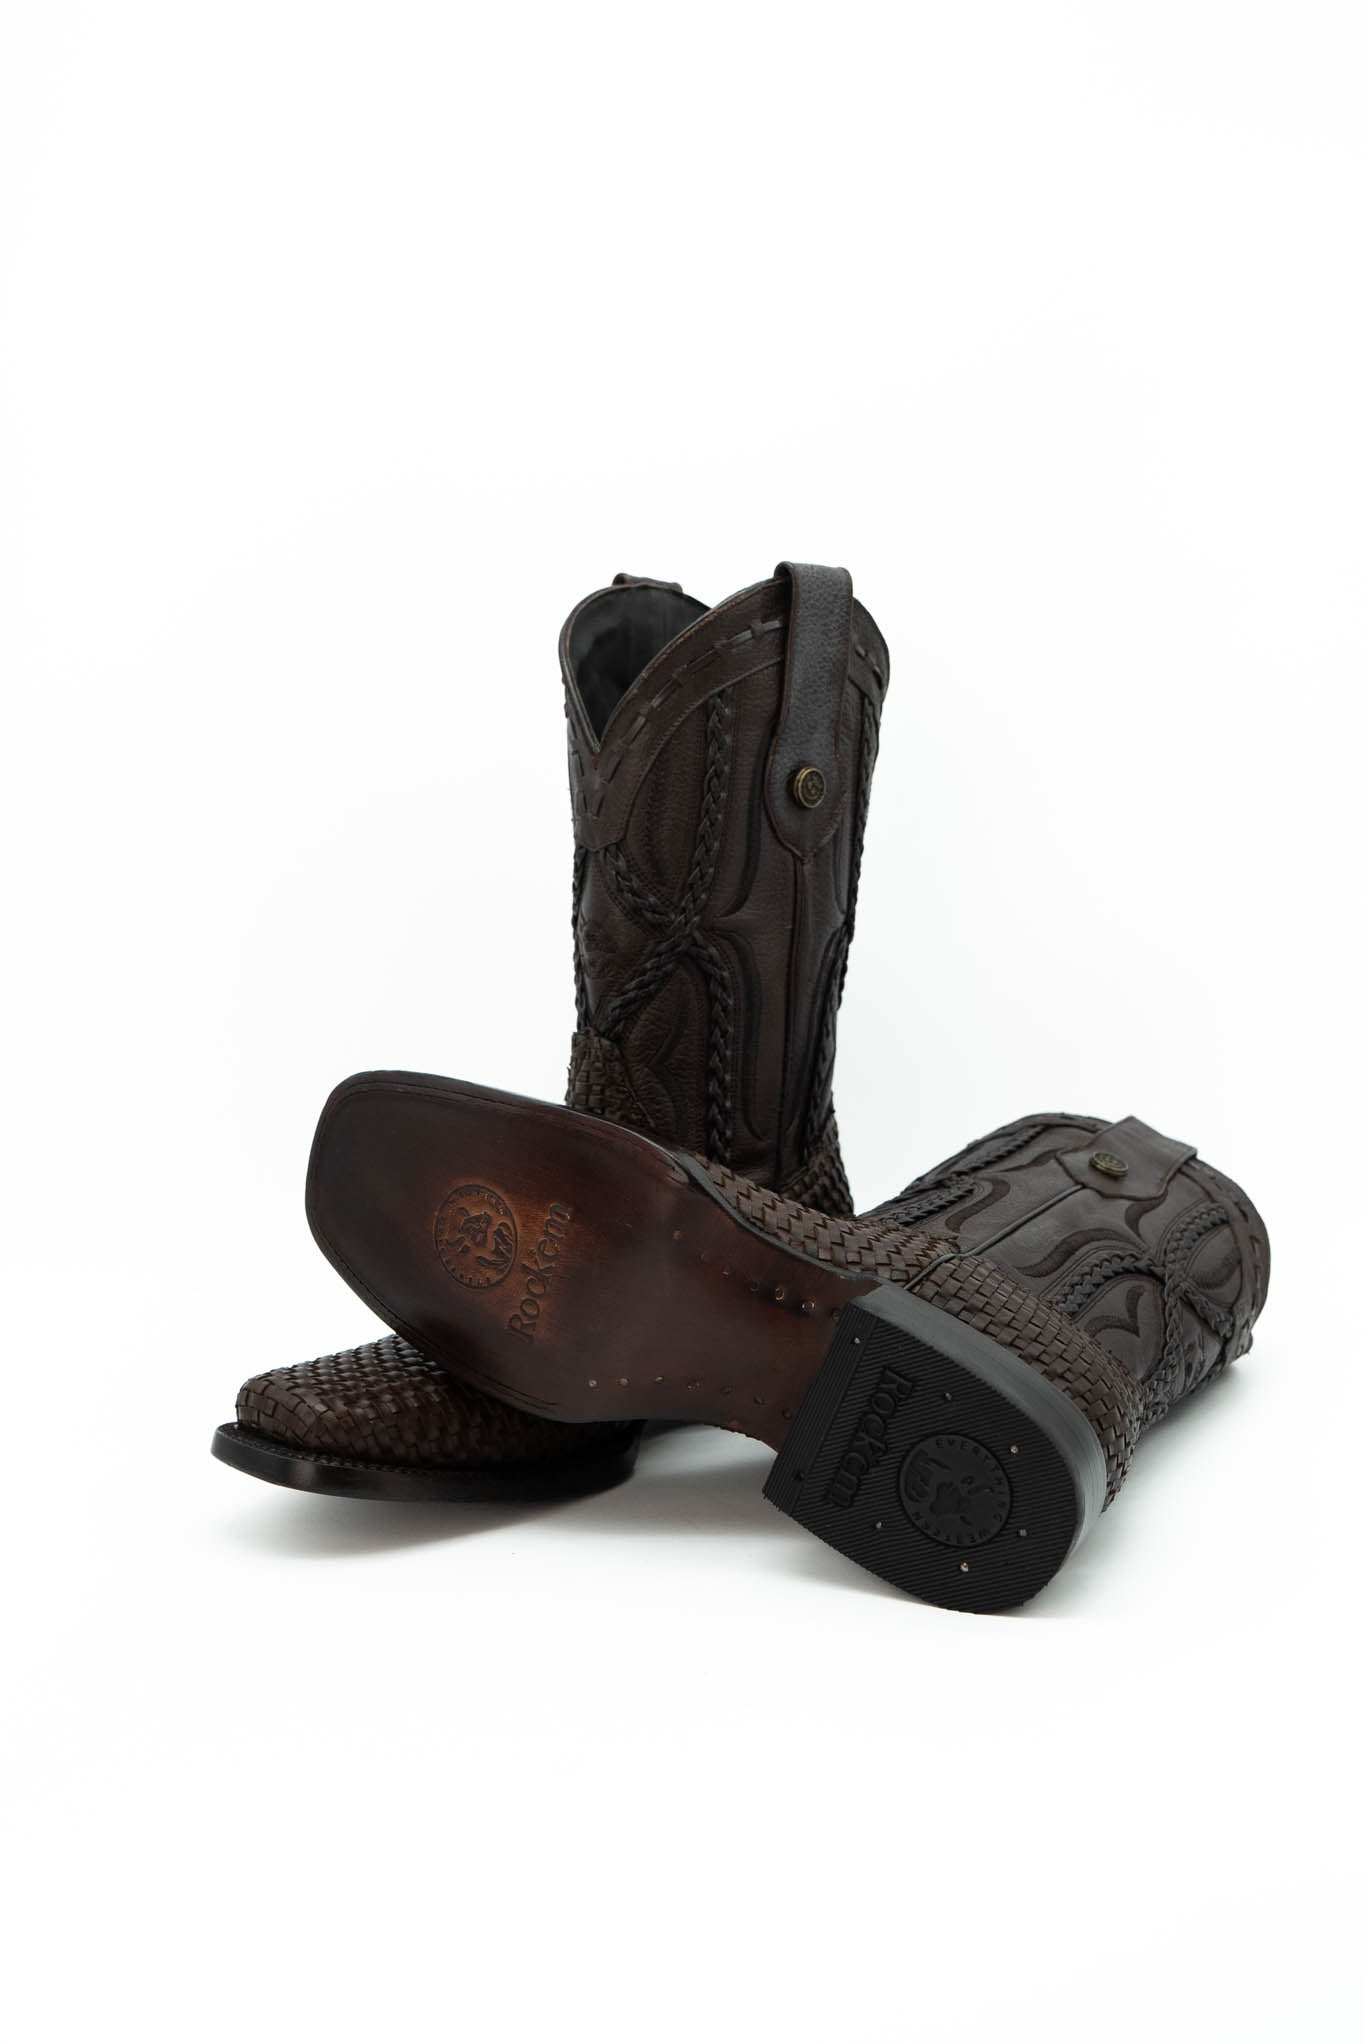 Men's Tejido Pull Up Rodeo Cowboy Boots